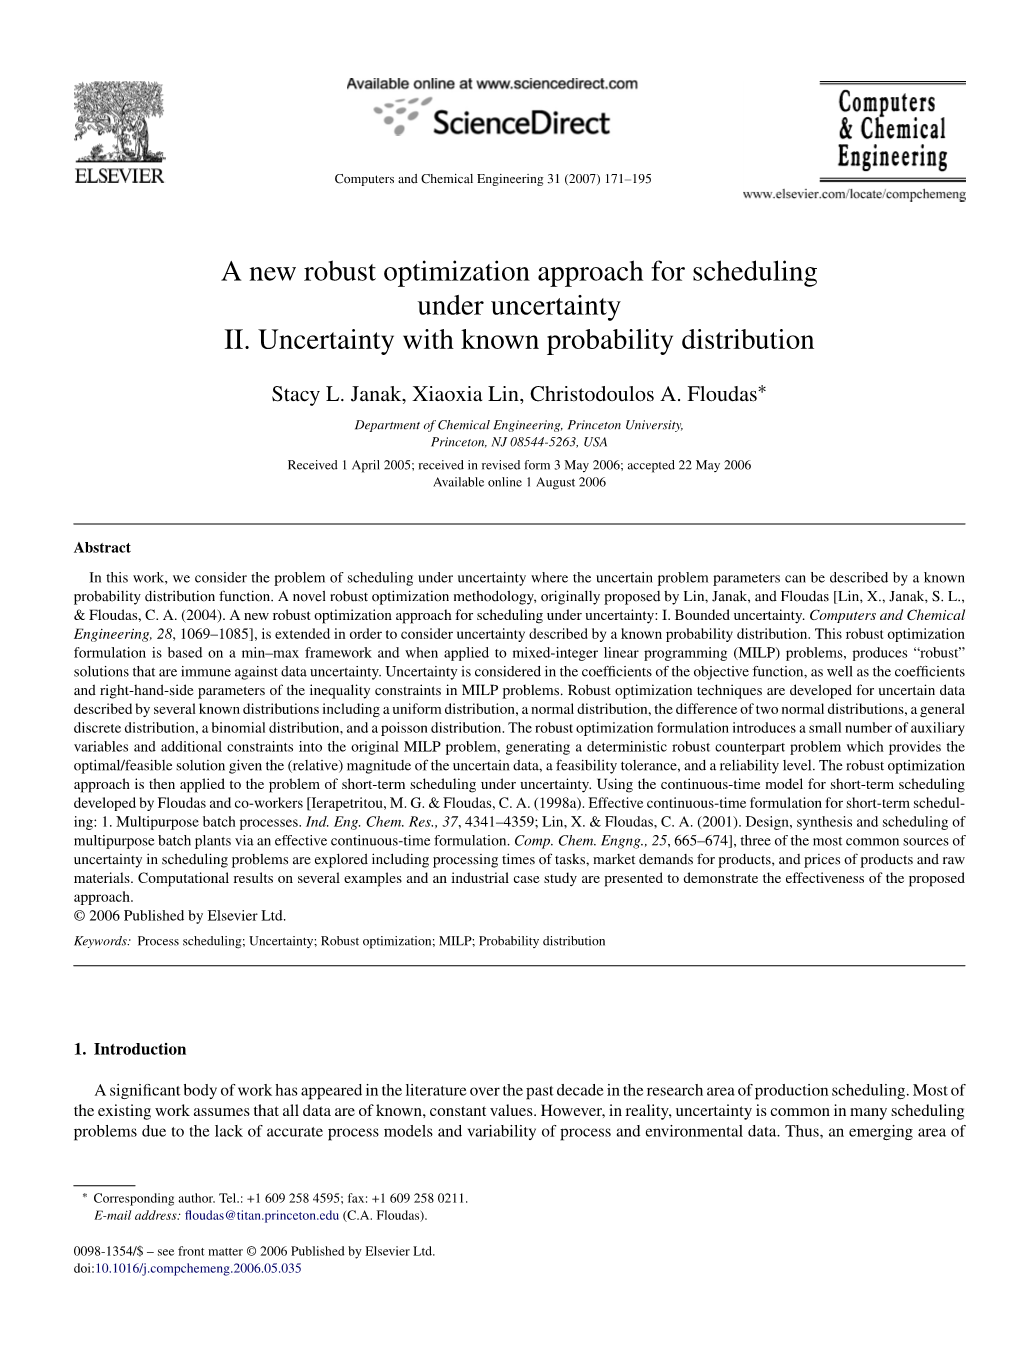 A New Robust Optimization Approach for Scheduling Under Uncertainty II